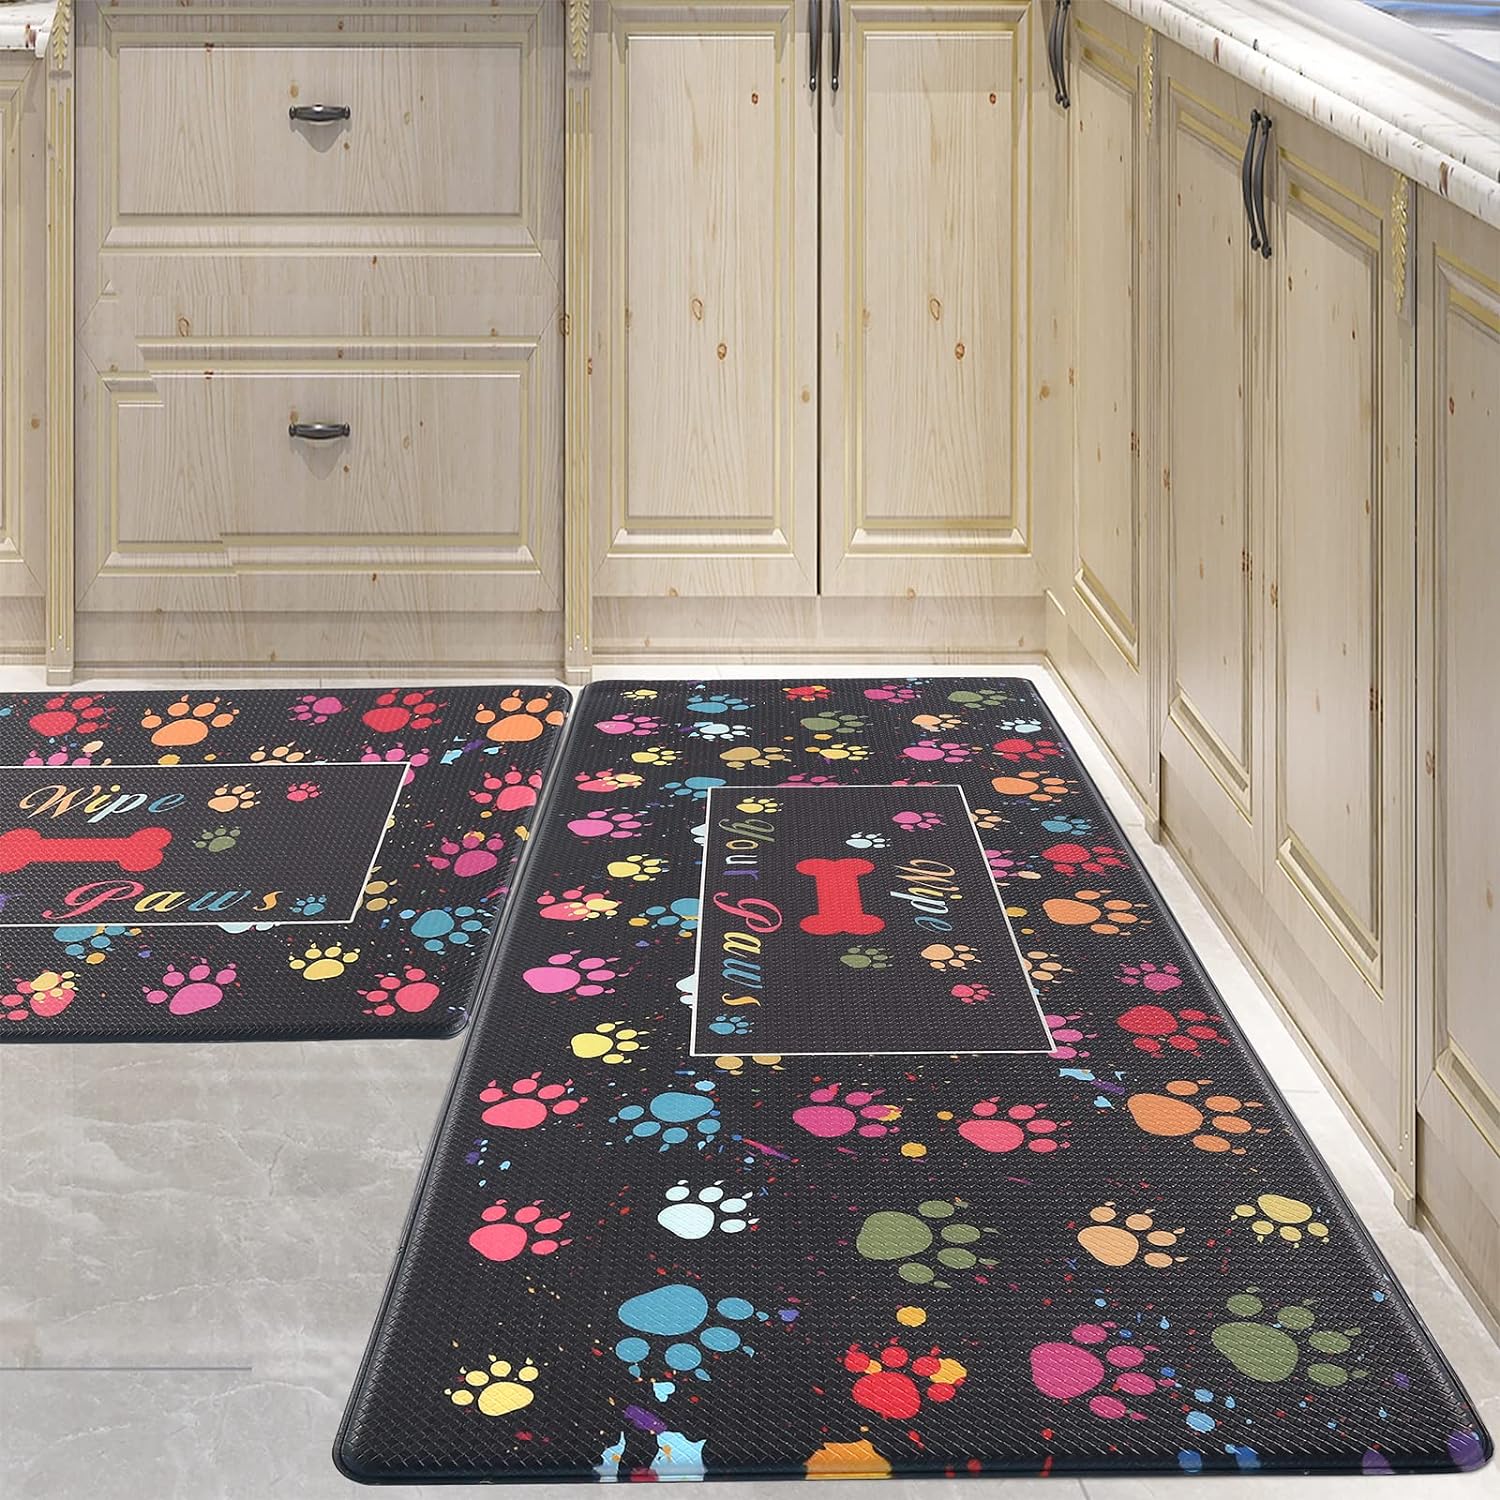 PCSWEET HOME Kitchen Mat Cushioned Anti-Fatigue Floor Mat,Waterproof Non-Skid Kitchen Mats and Rugs Comfort Standing Mat for Kitchen, Home, Office, Sink, Laundry, Colorful Paws (Multicolor)